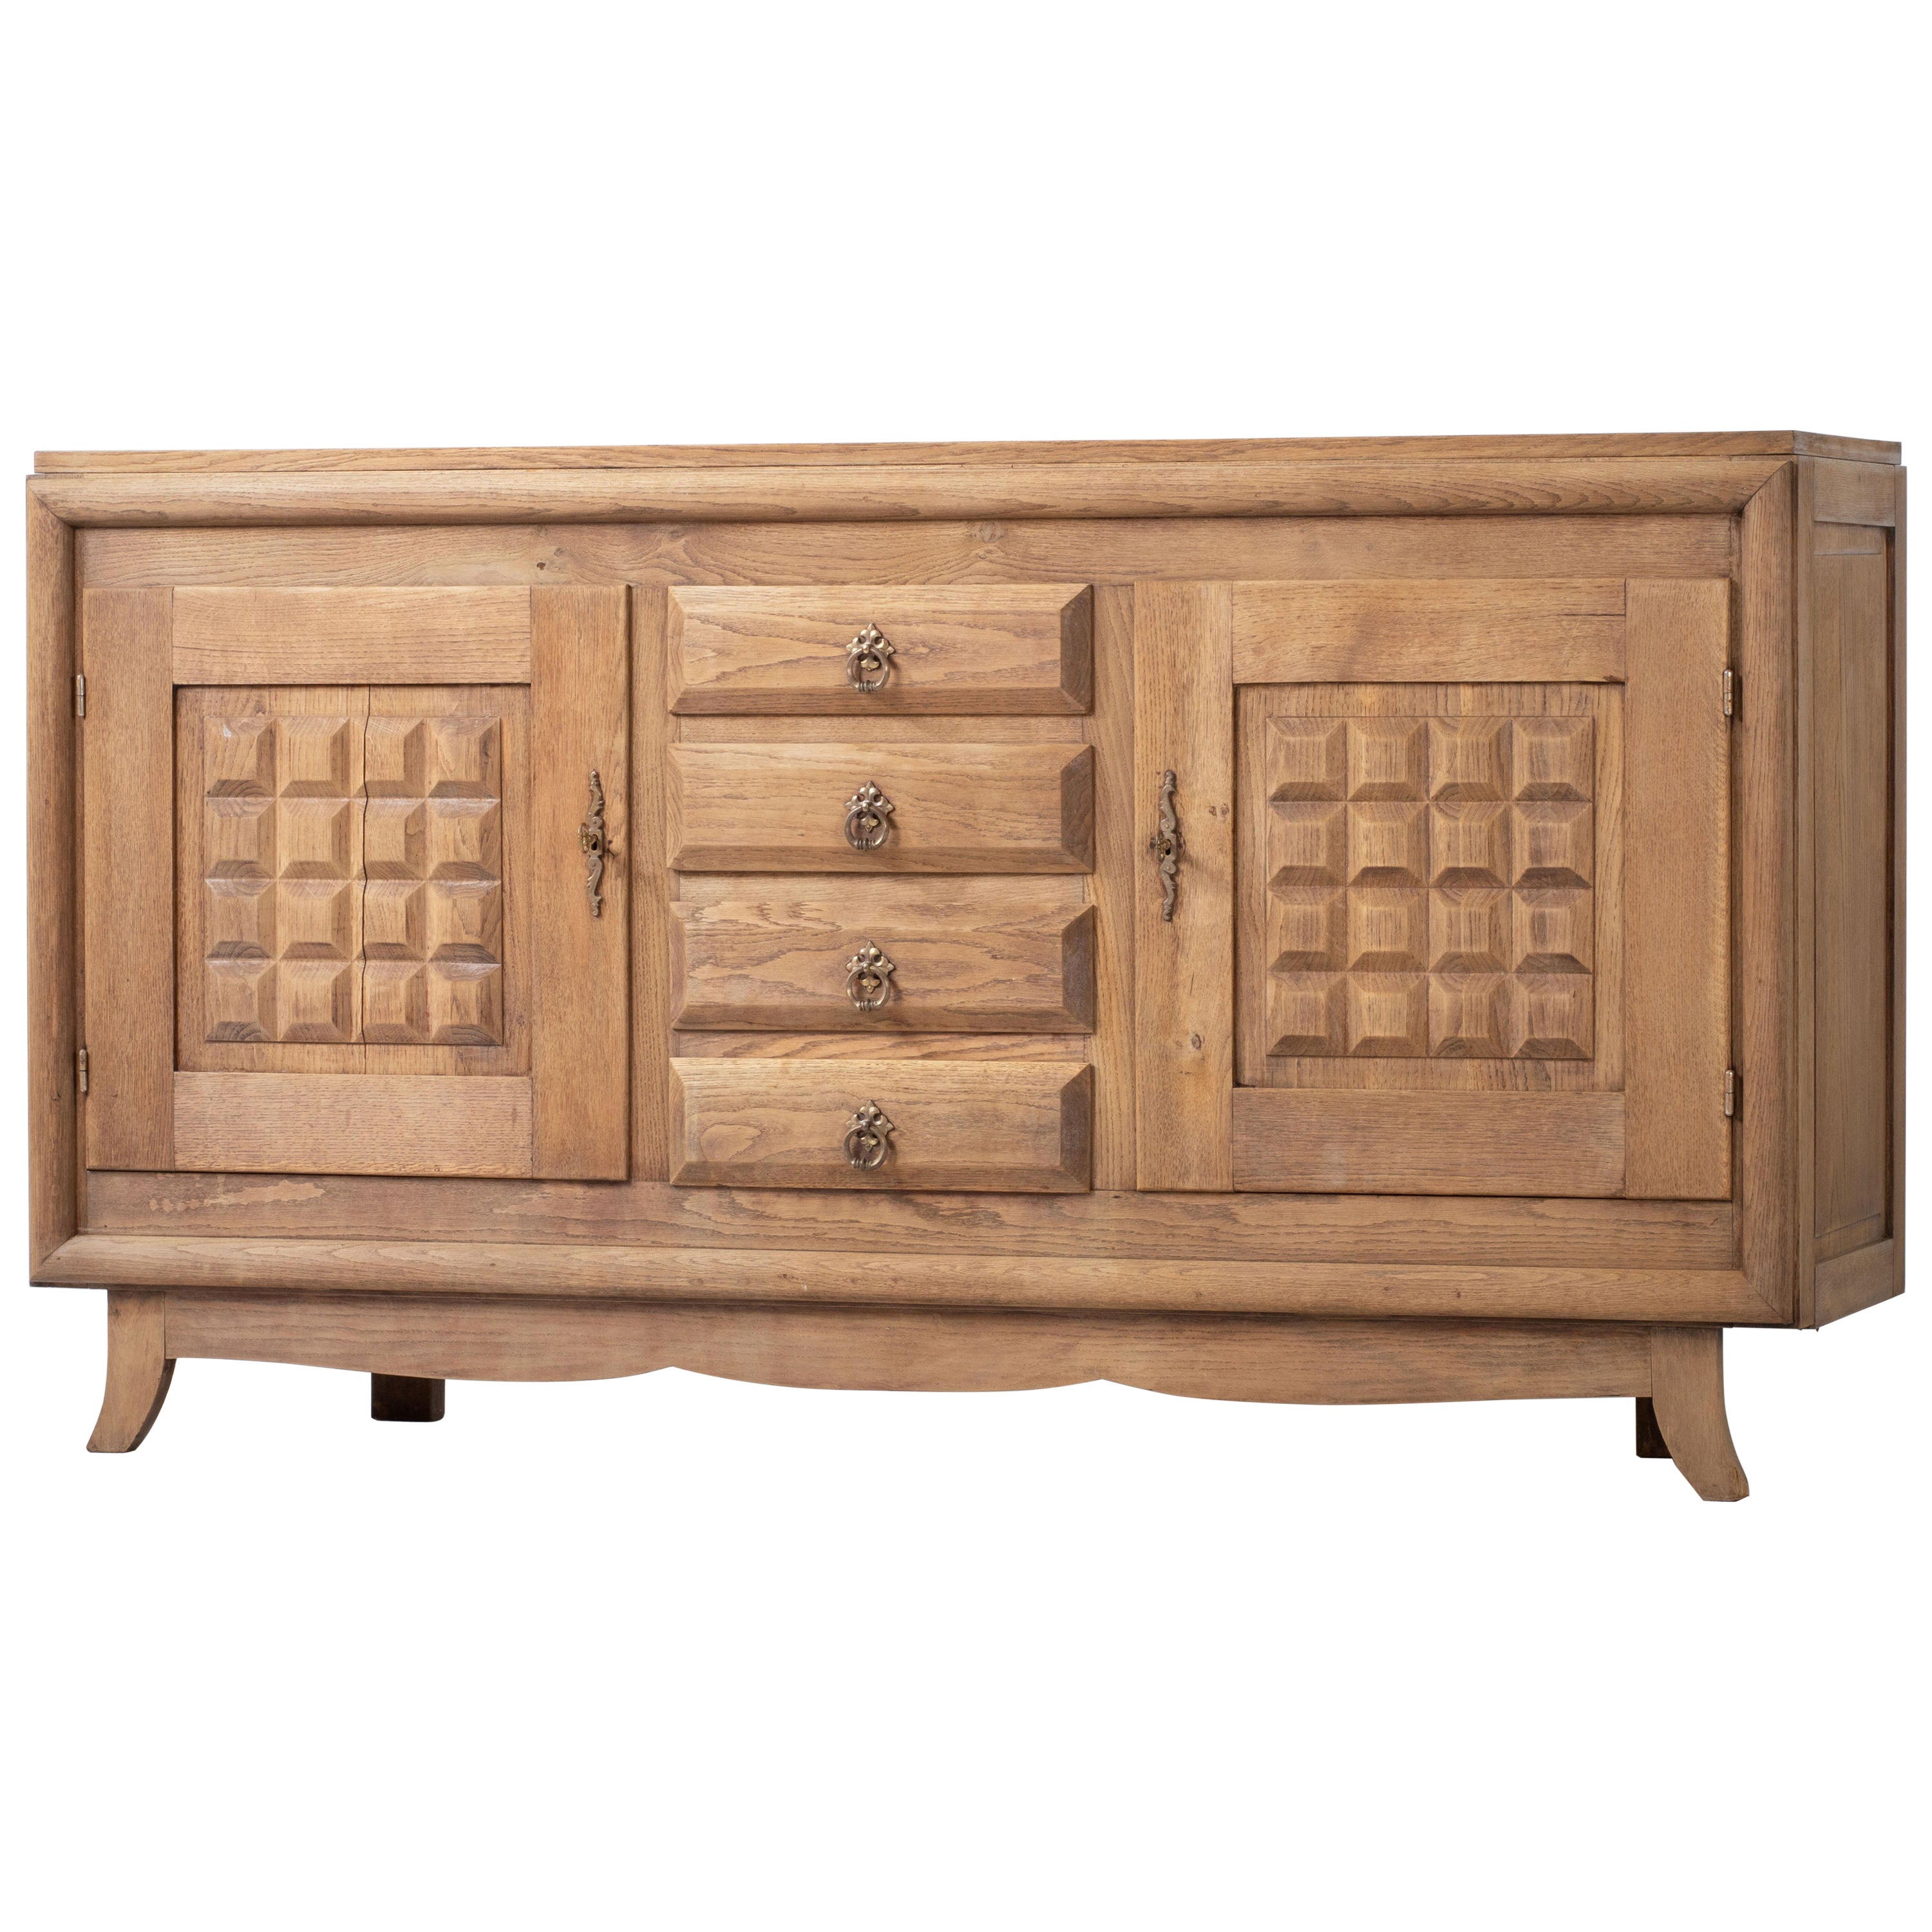 Raw Solid Oak Cabinet with Graphic Details, France, 1940s